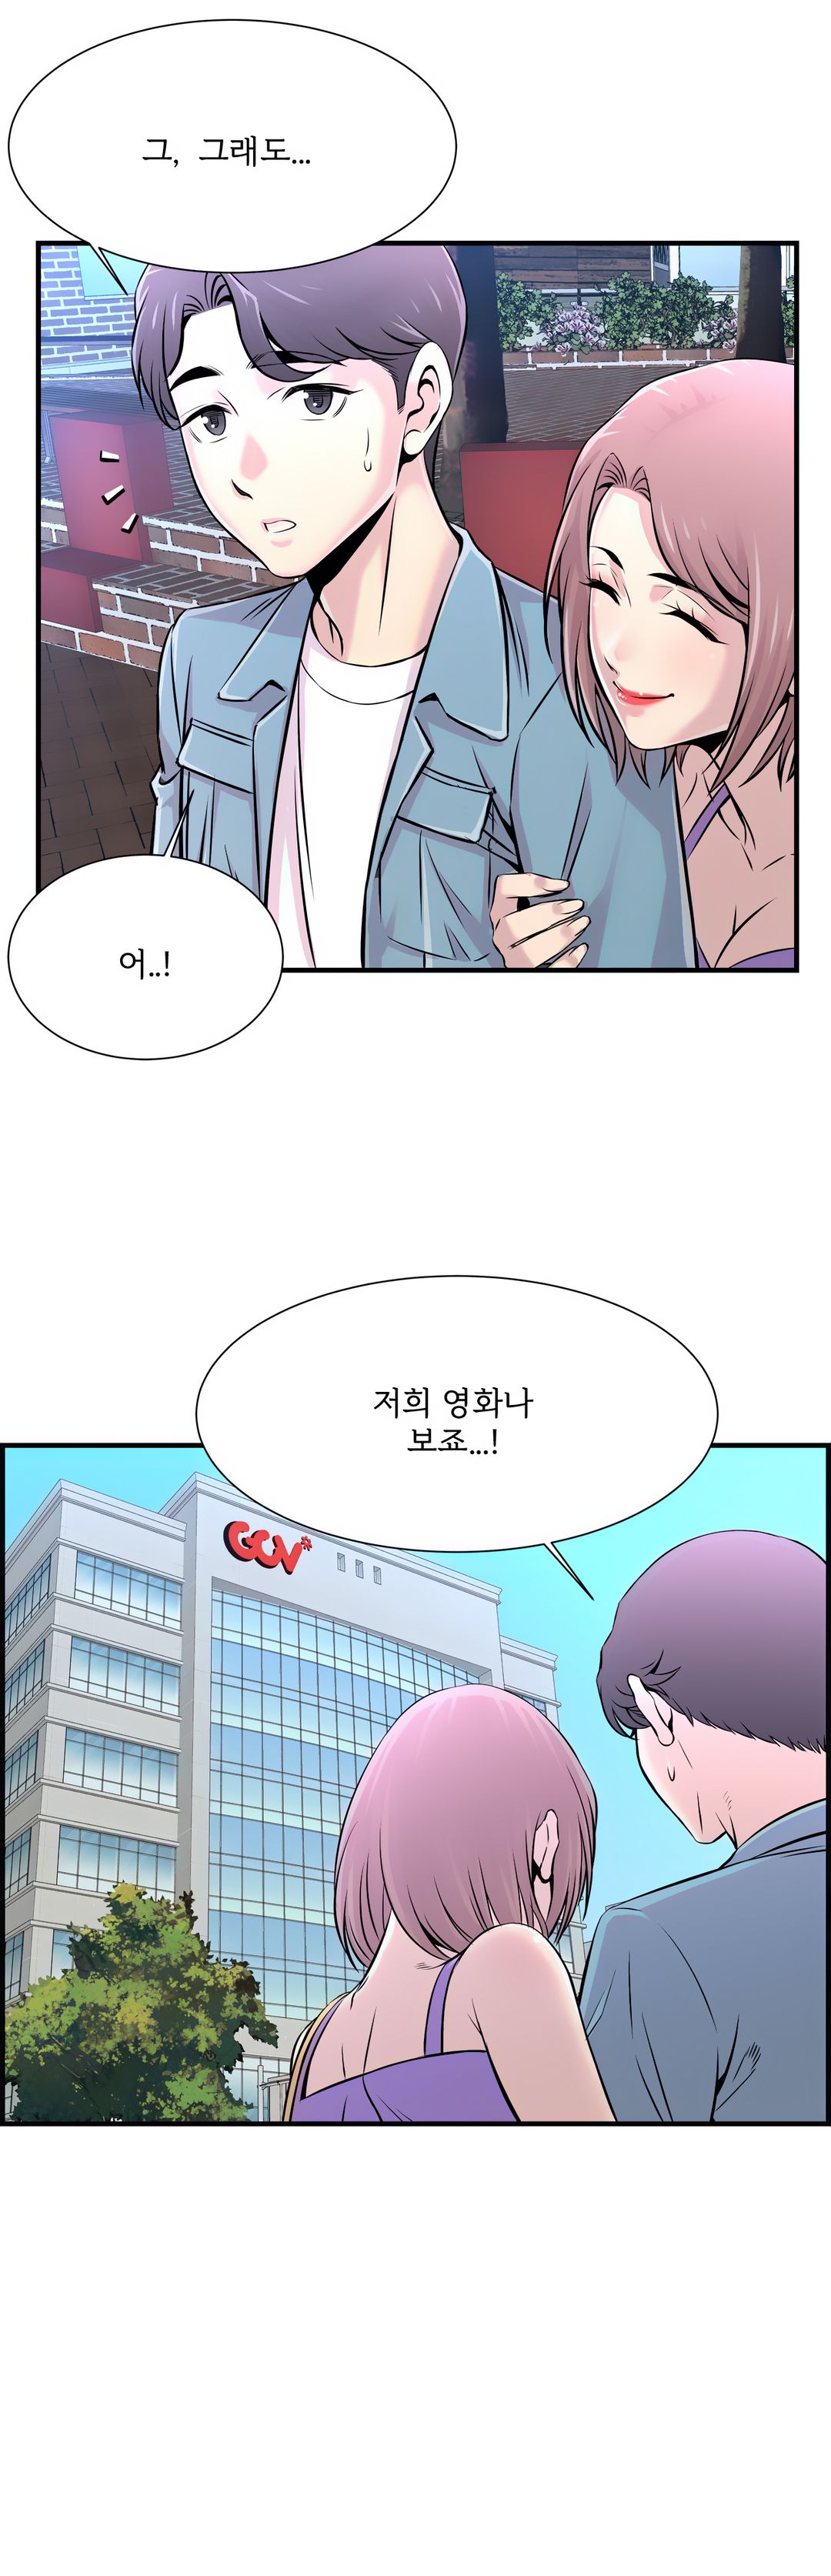 Cram School Scandal Raw - Chapter 15 Page 3